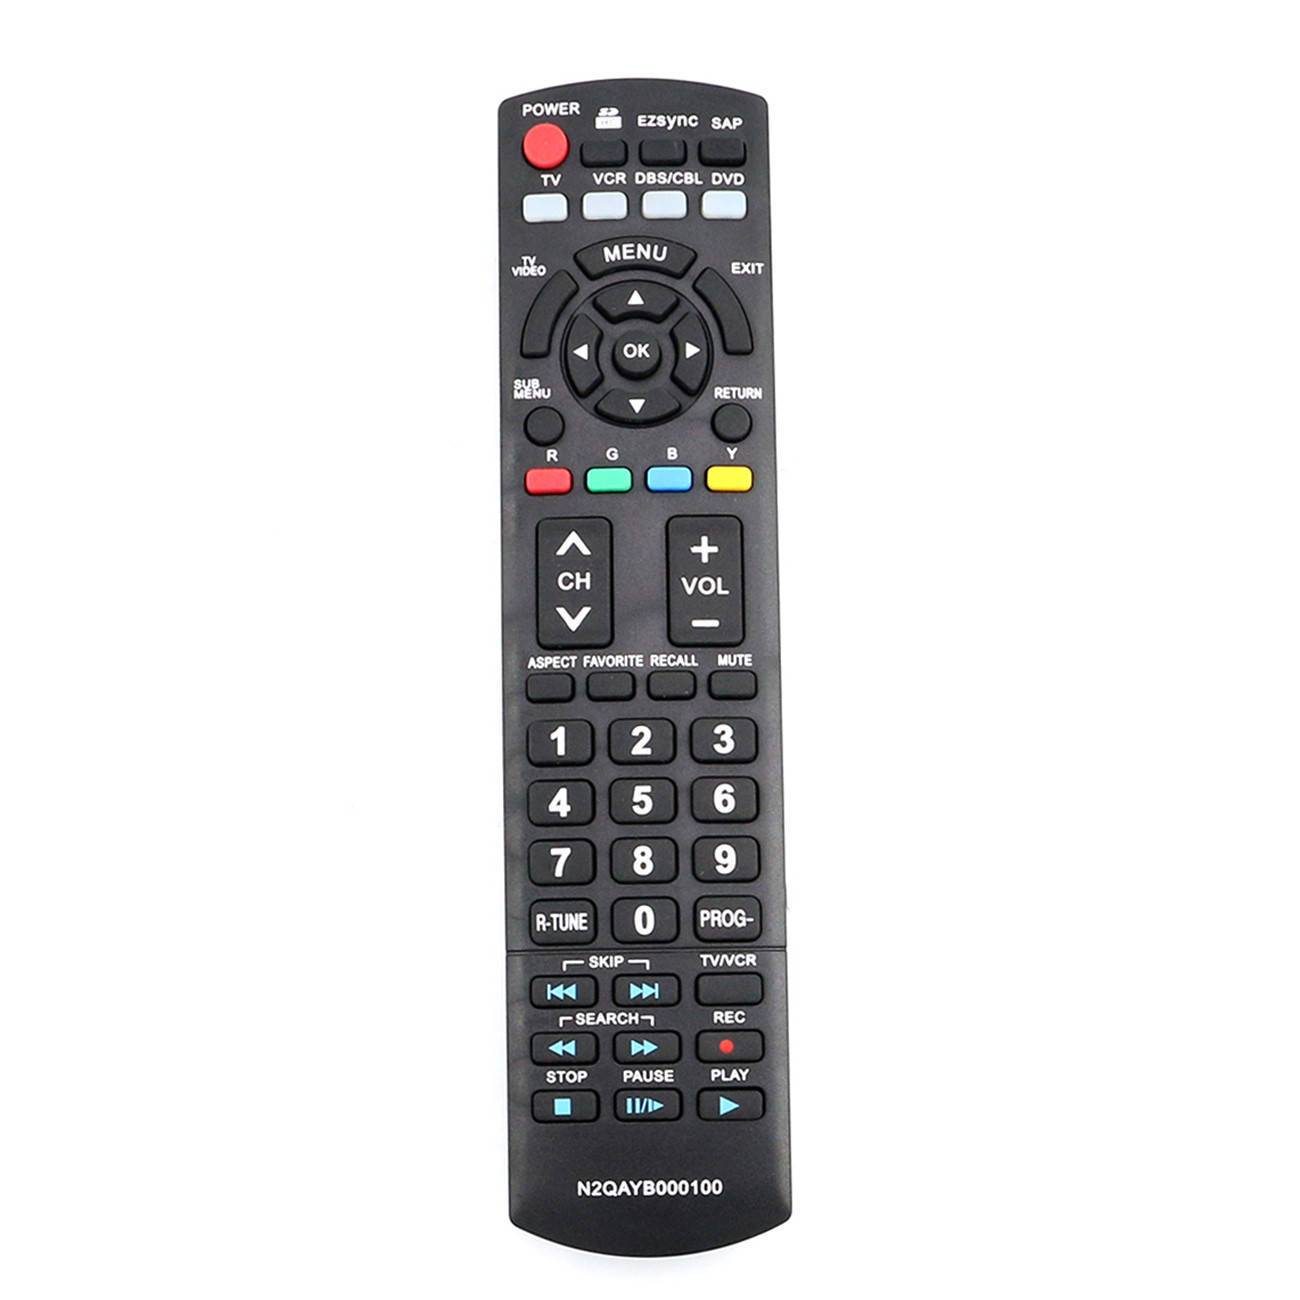 N2QAYB000100 Replacement Remote Control for Panasonic TV